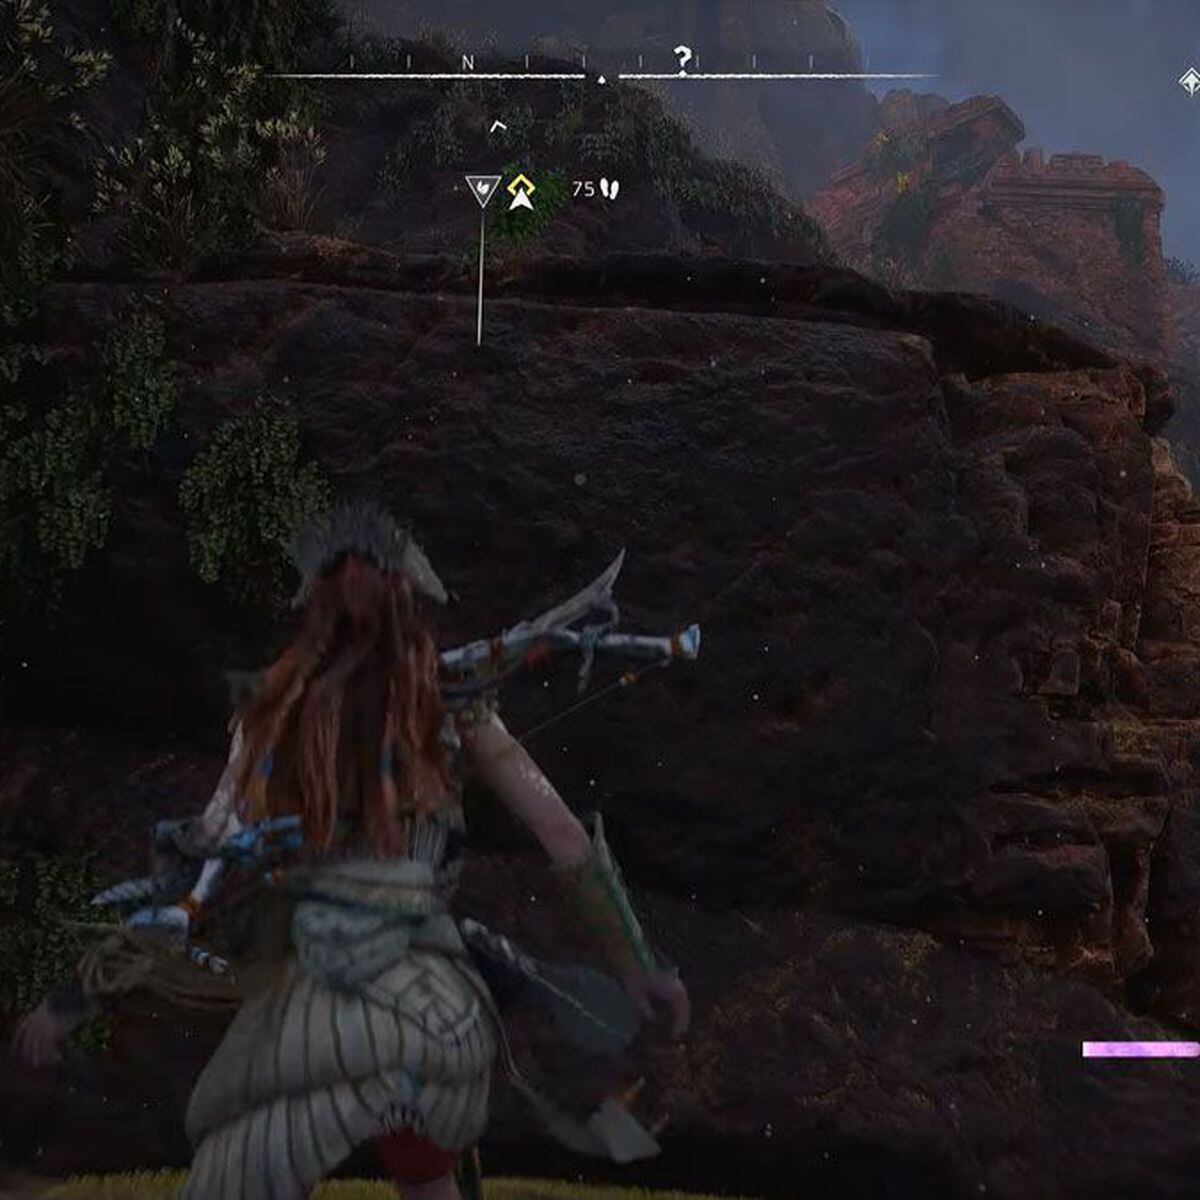 How to find Signal Towers in Horizon Forbidden West - Polygon